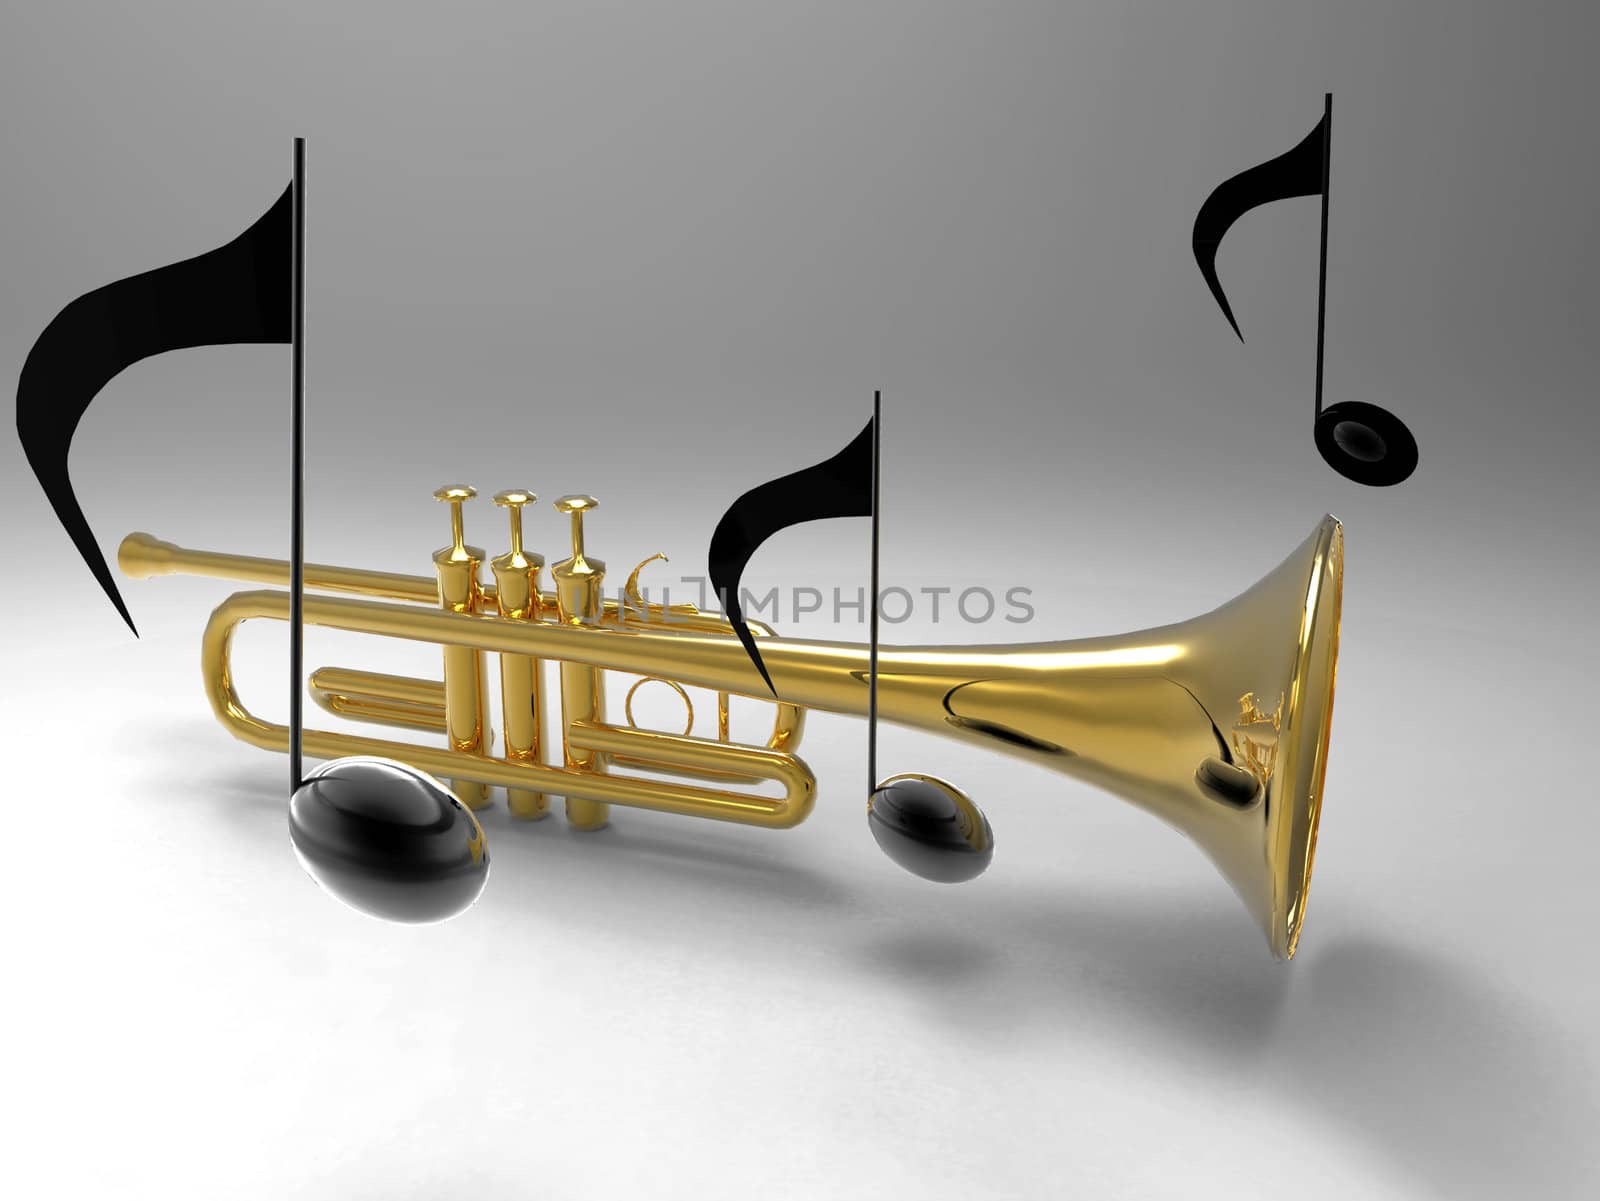 the trumpet and the notes